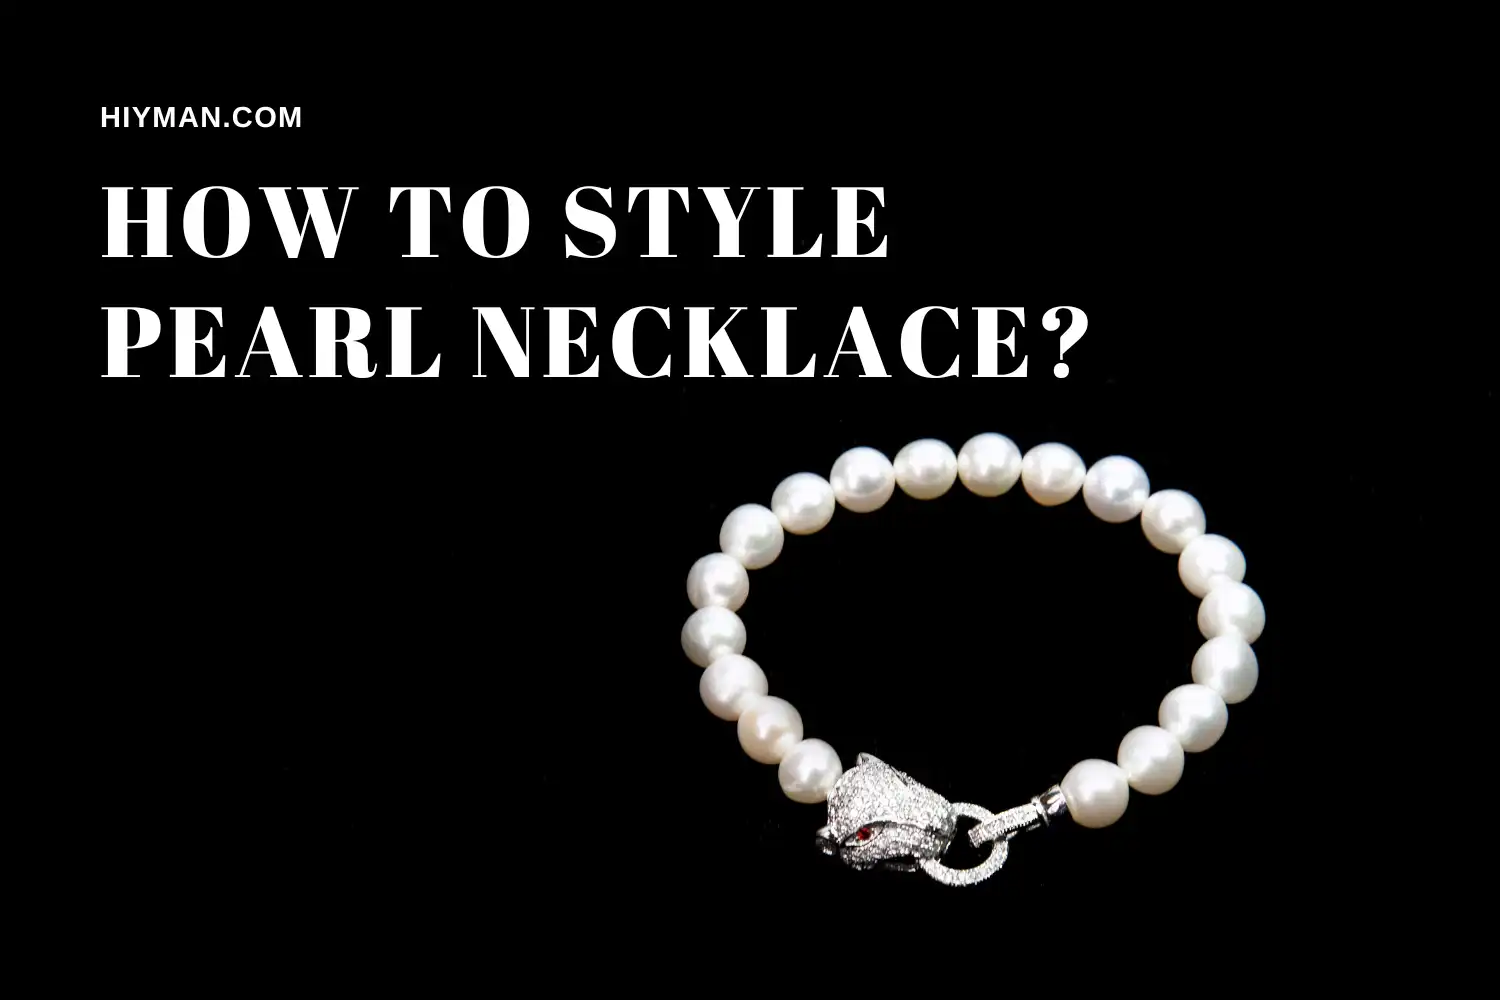 How to style pearl necklace men?